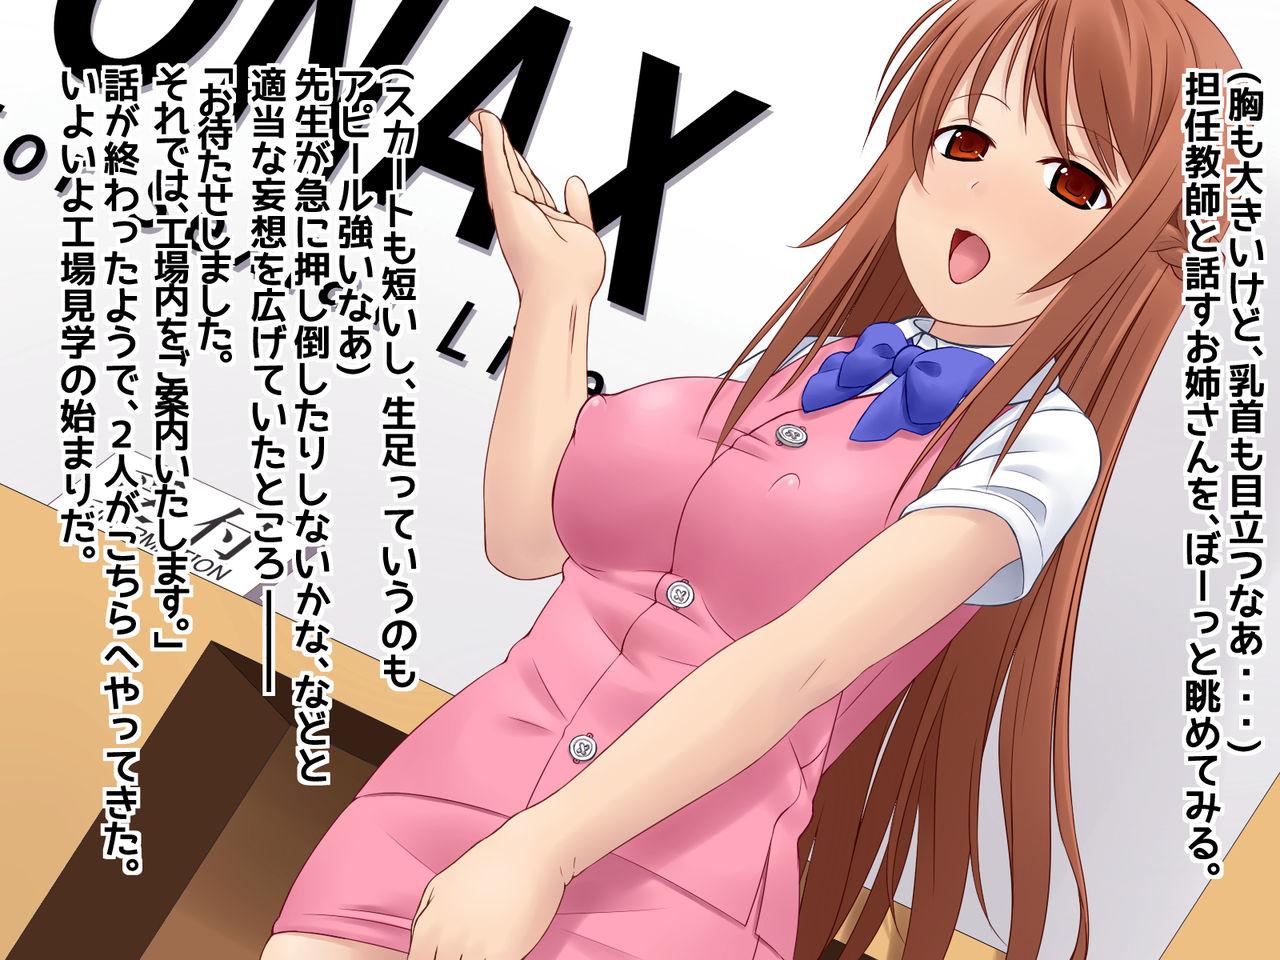 I ... become a meat urinal! Poor females are fallen into a semen processing hole and happy ending ♪ 3